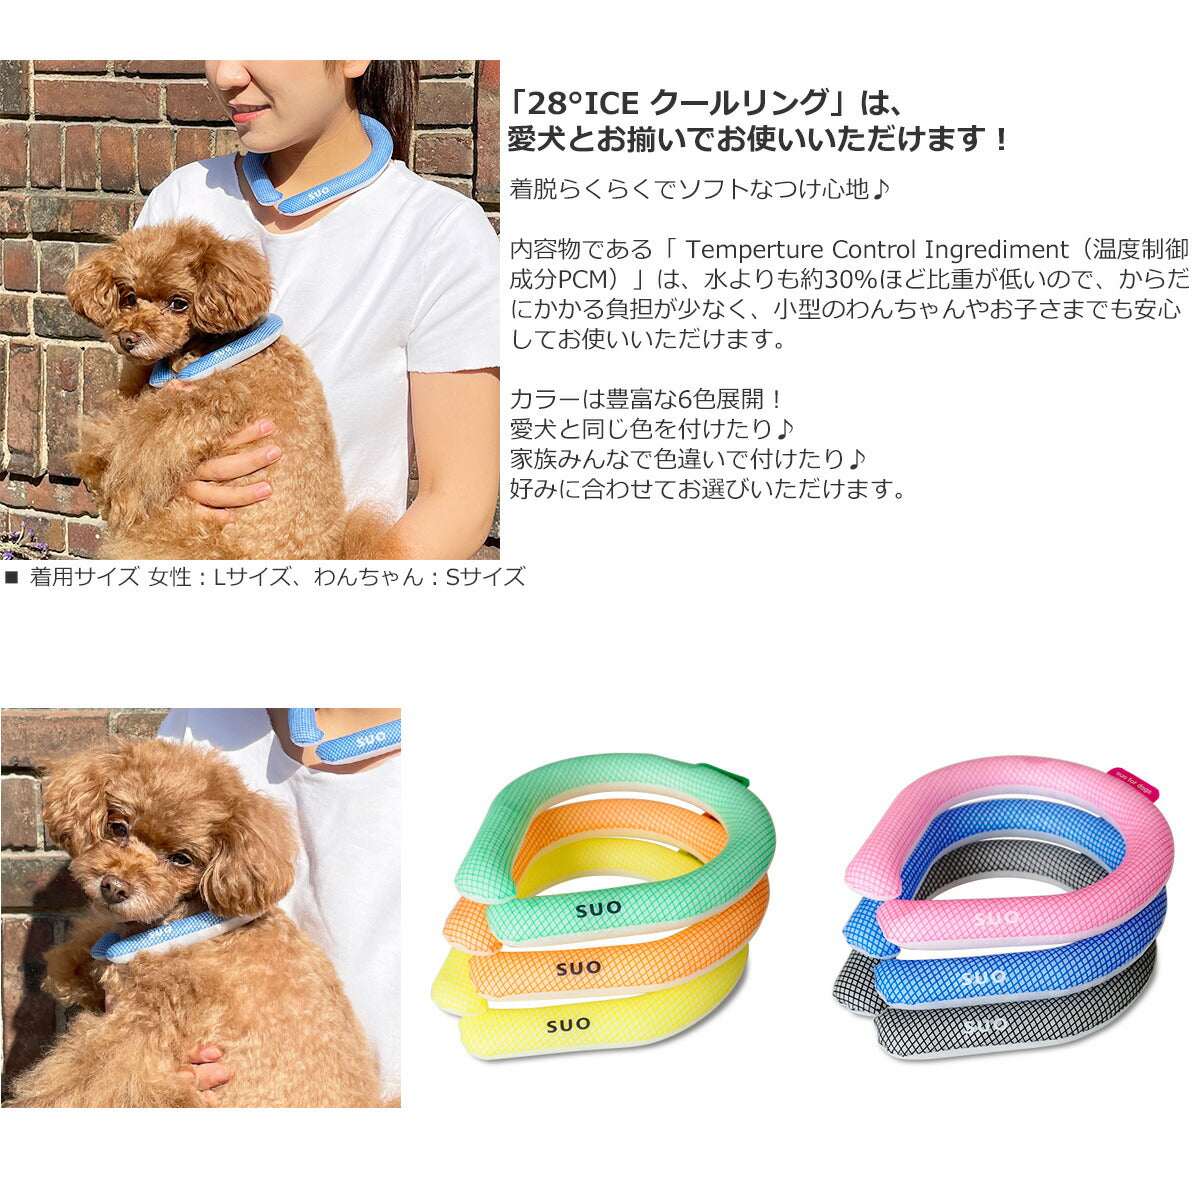 SUO for dogs 28°ICE SUOリング ボタンなし S ピンク 熱中症対策グッズ 暑さ対策 ひんやり 首 冷感 犬 大人 子供